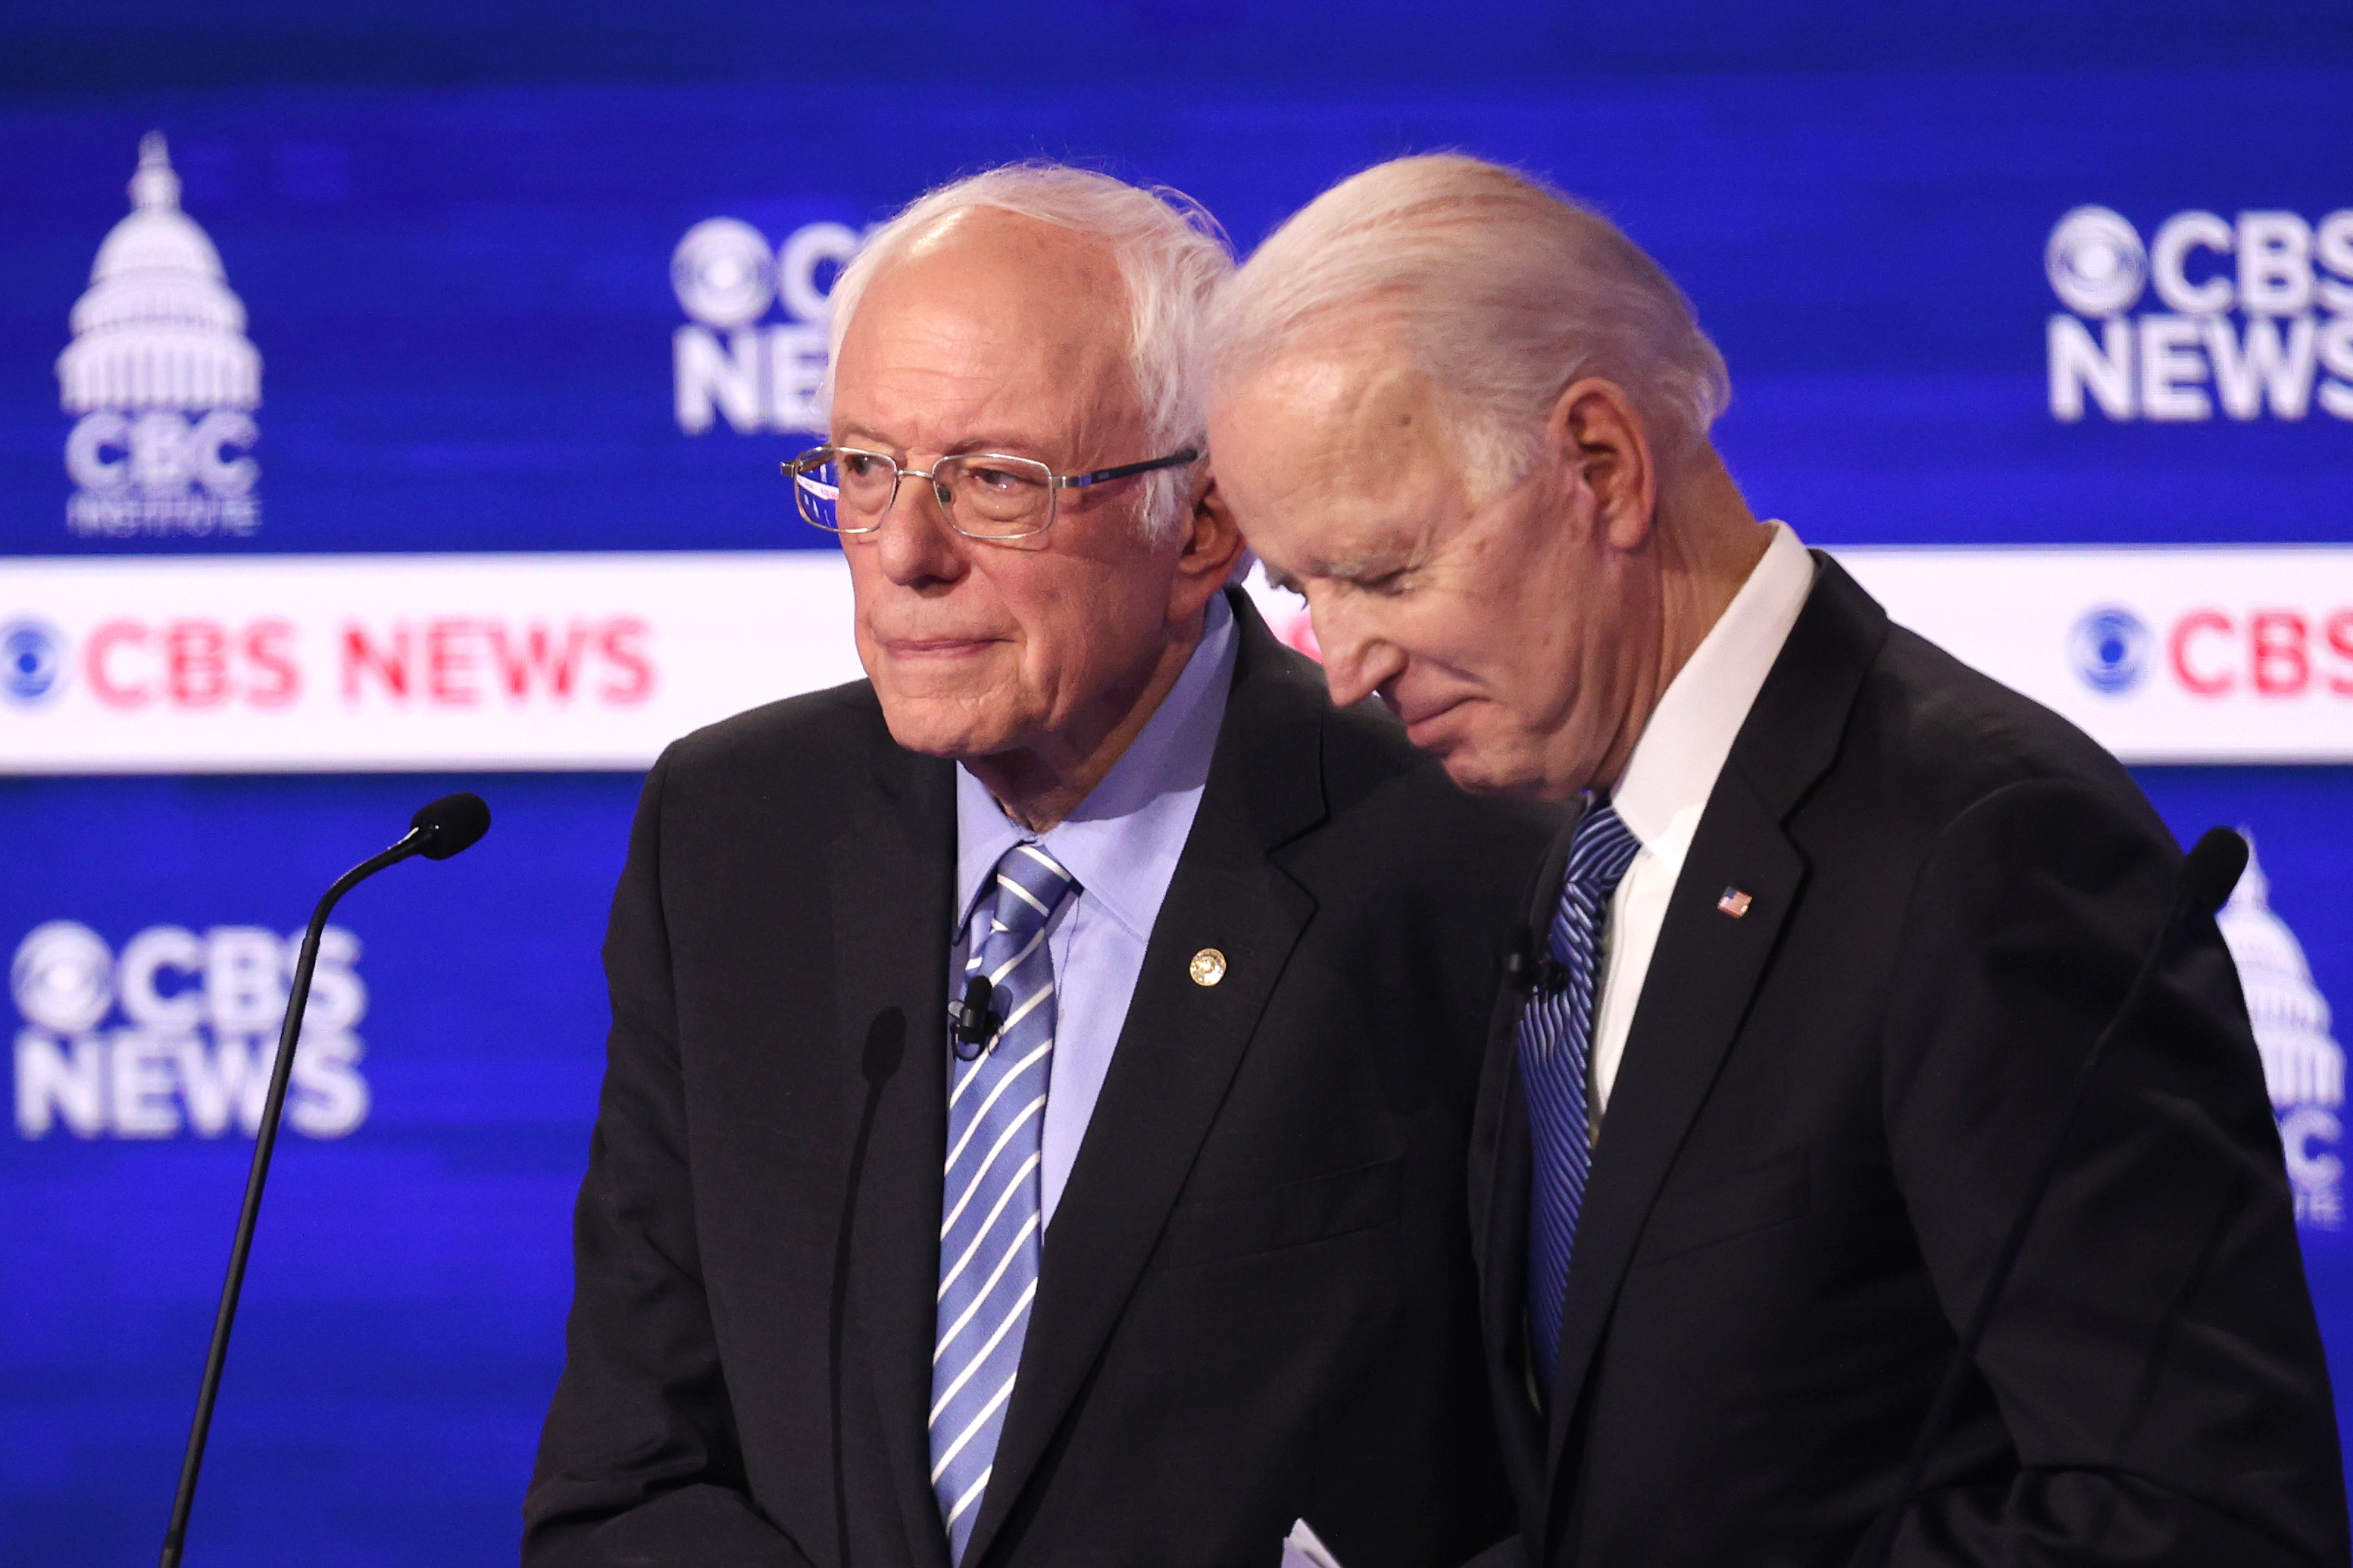 CHARLESTON, SOUTH CAROLINA - FEBRUARY 25: Democratic presidential candidates Sen. Bernie Sanders (I-VT) and former Vice President Joe Biden speak during a break at the Democratic presidential primary debate at the Charleston Gaillard Center on February 25, 2020 in Charleston, South Carolina. Seven candidates qualified for the debate, hosted by CBS News and Congressional Black Caucus Institute, ahead of South Carolina’s primary in four days. (Photo by Win McNamee/Getty Images)